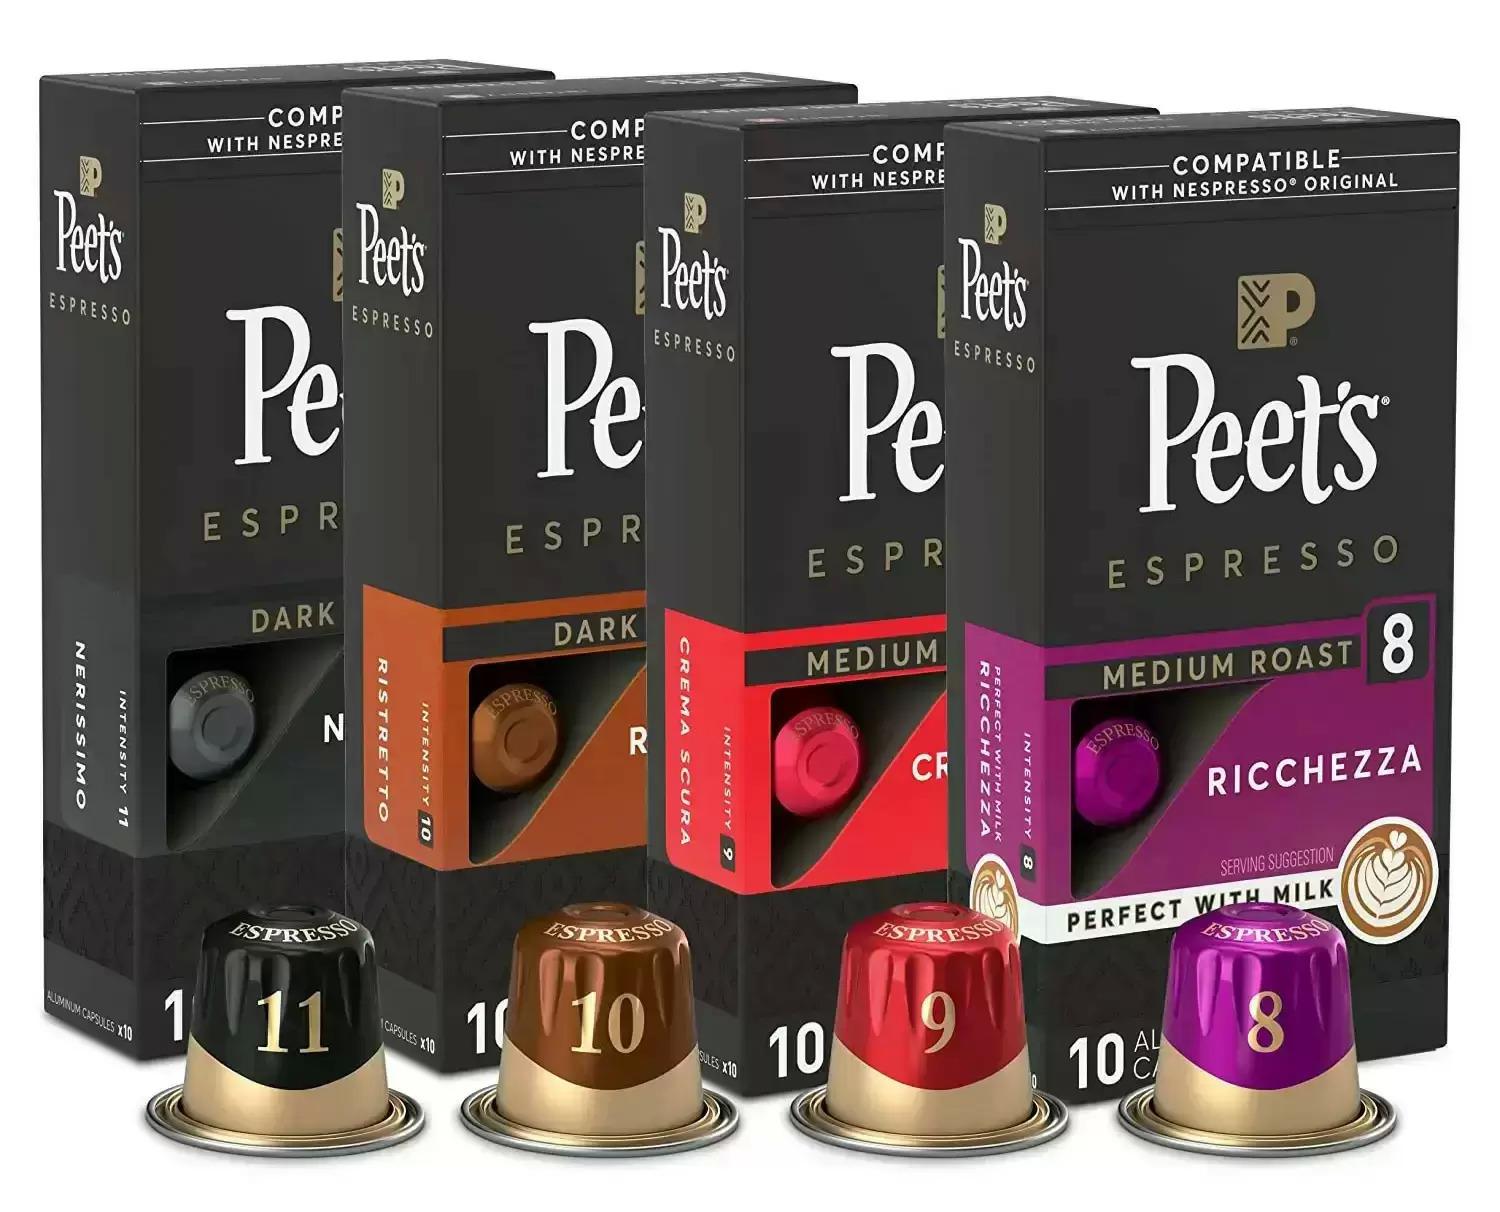 40 Peets Coffee Nespresso Capsules Variety Pack for $16.03 Shipped